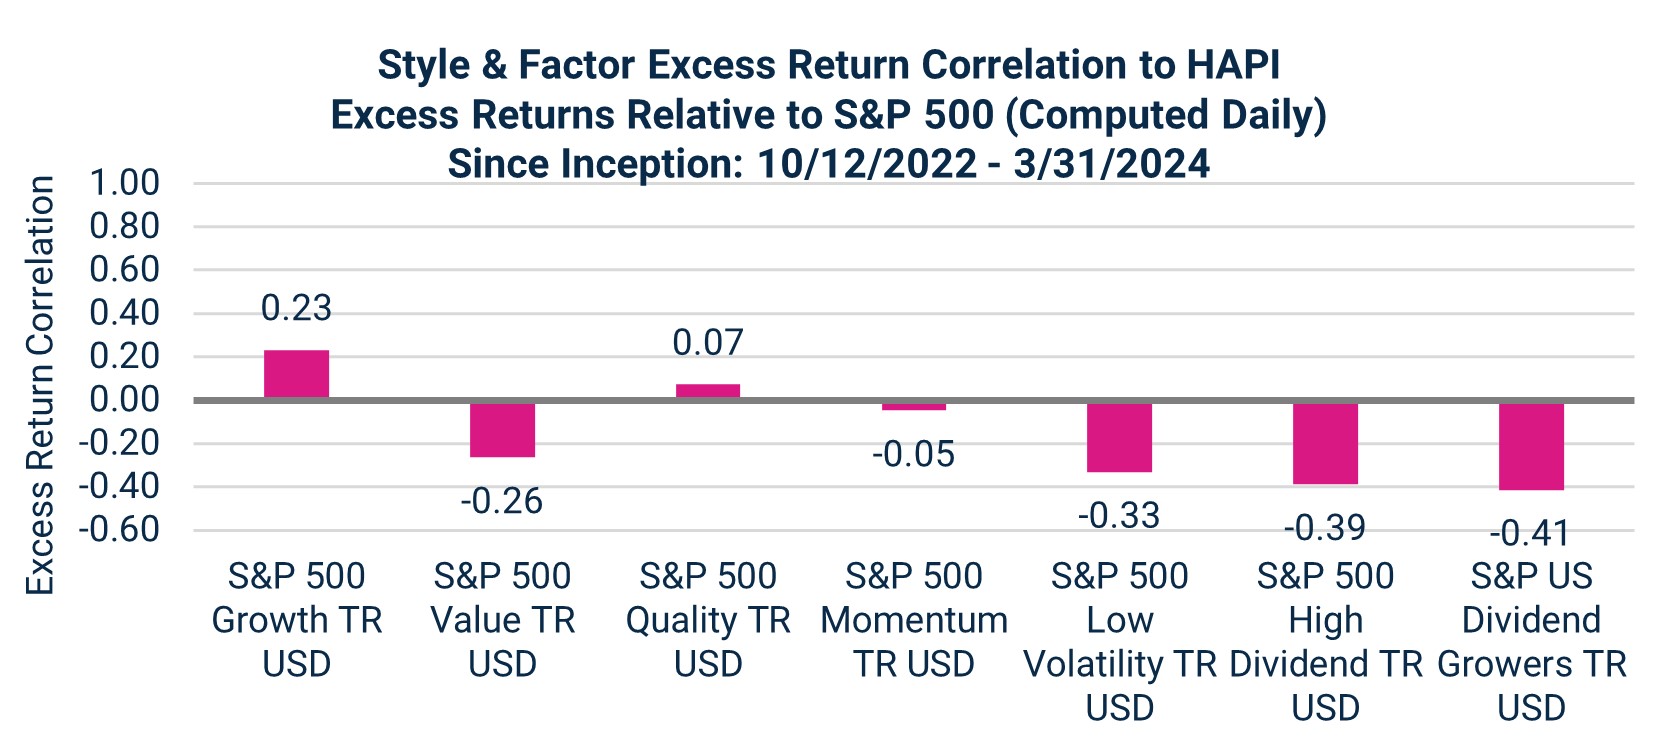 Style & Factor Excess Return Correlation to HAPI Excess Returns Relative to S&P 500 (Computed Daily) Since Inception: 10/12/2022 - 3/31/2024